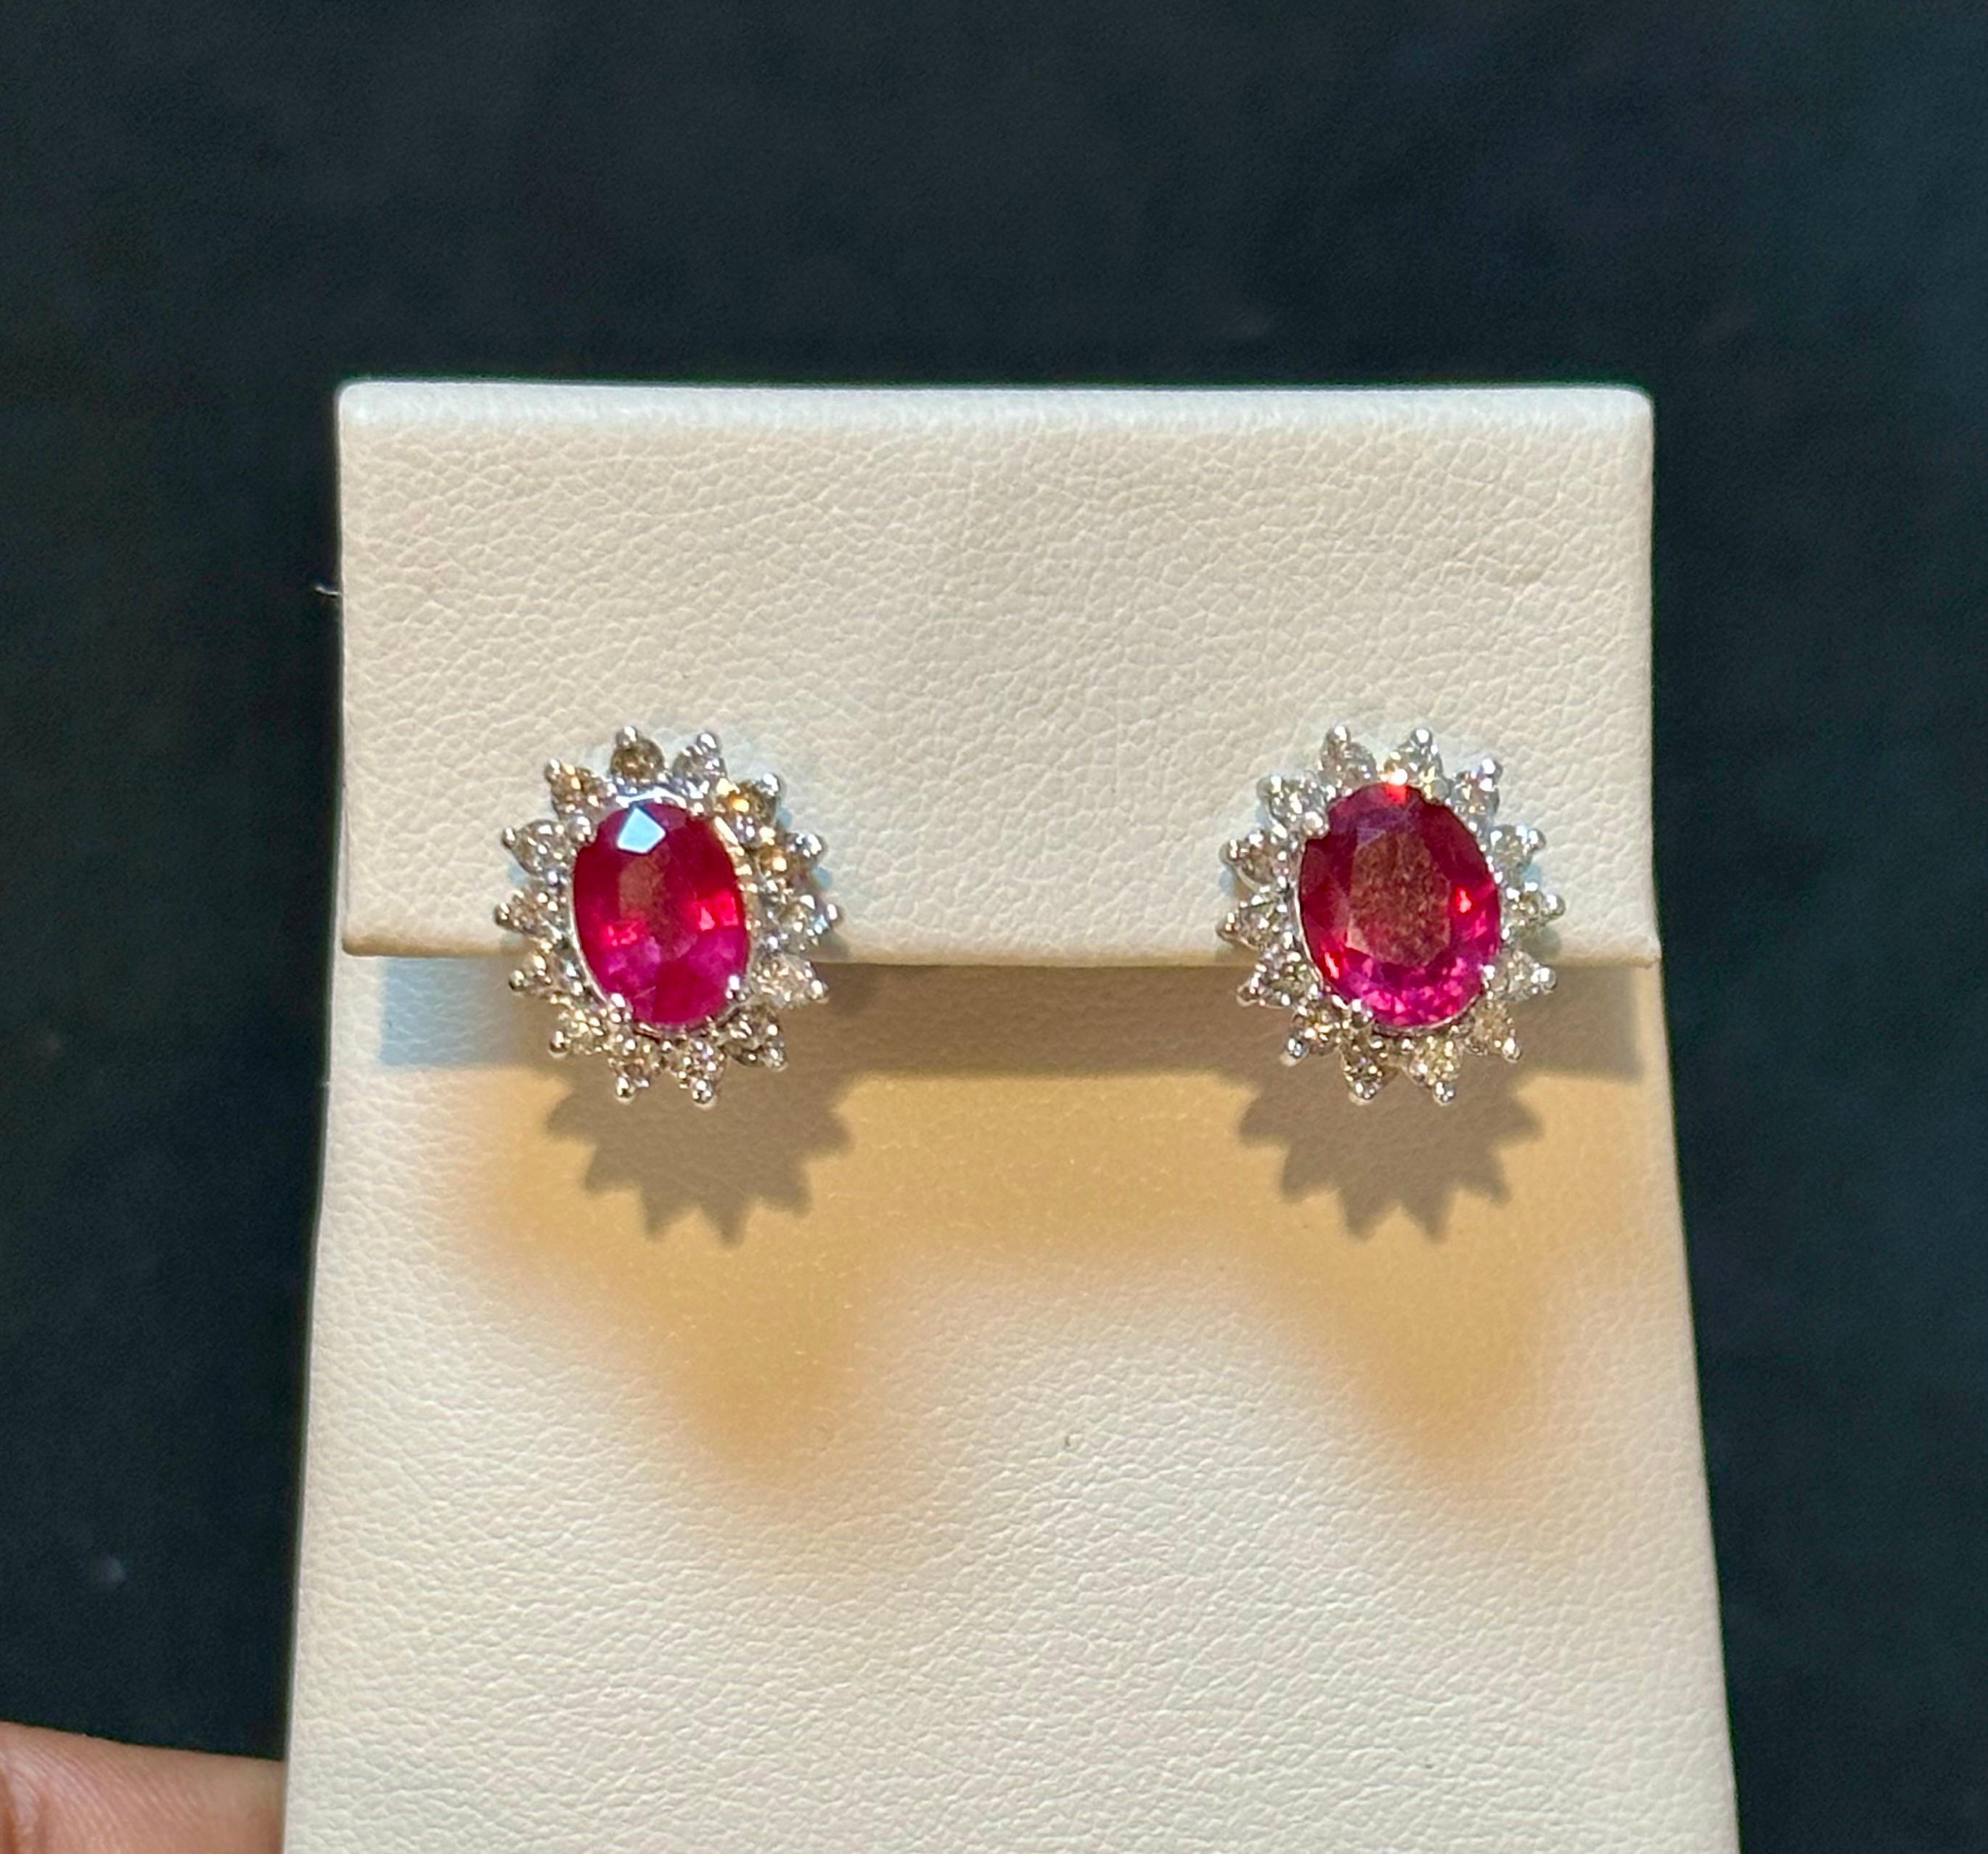 These stunning stud earrings feature a 6 carat oval treated ruby and 1.2 carats of brilliant-cut diamonds. They are meticulously crafted with 14 karat white gold and designed with a post back for secure wearing. The 14K gold used in these earrings